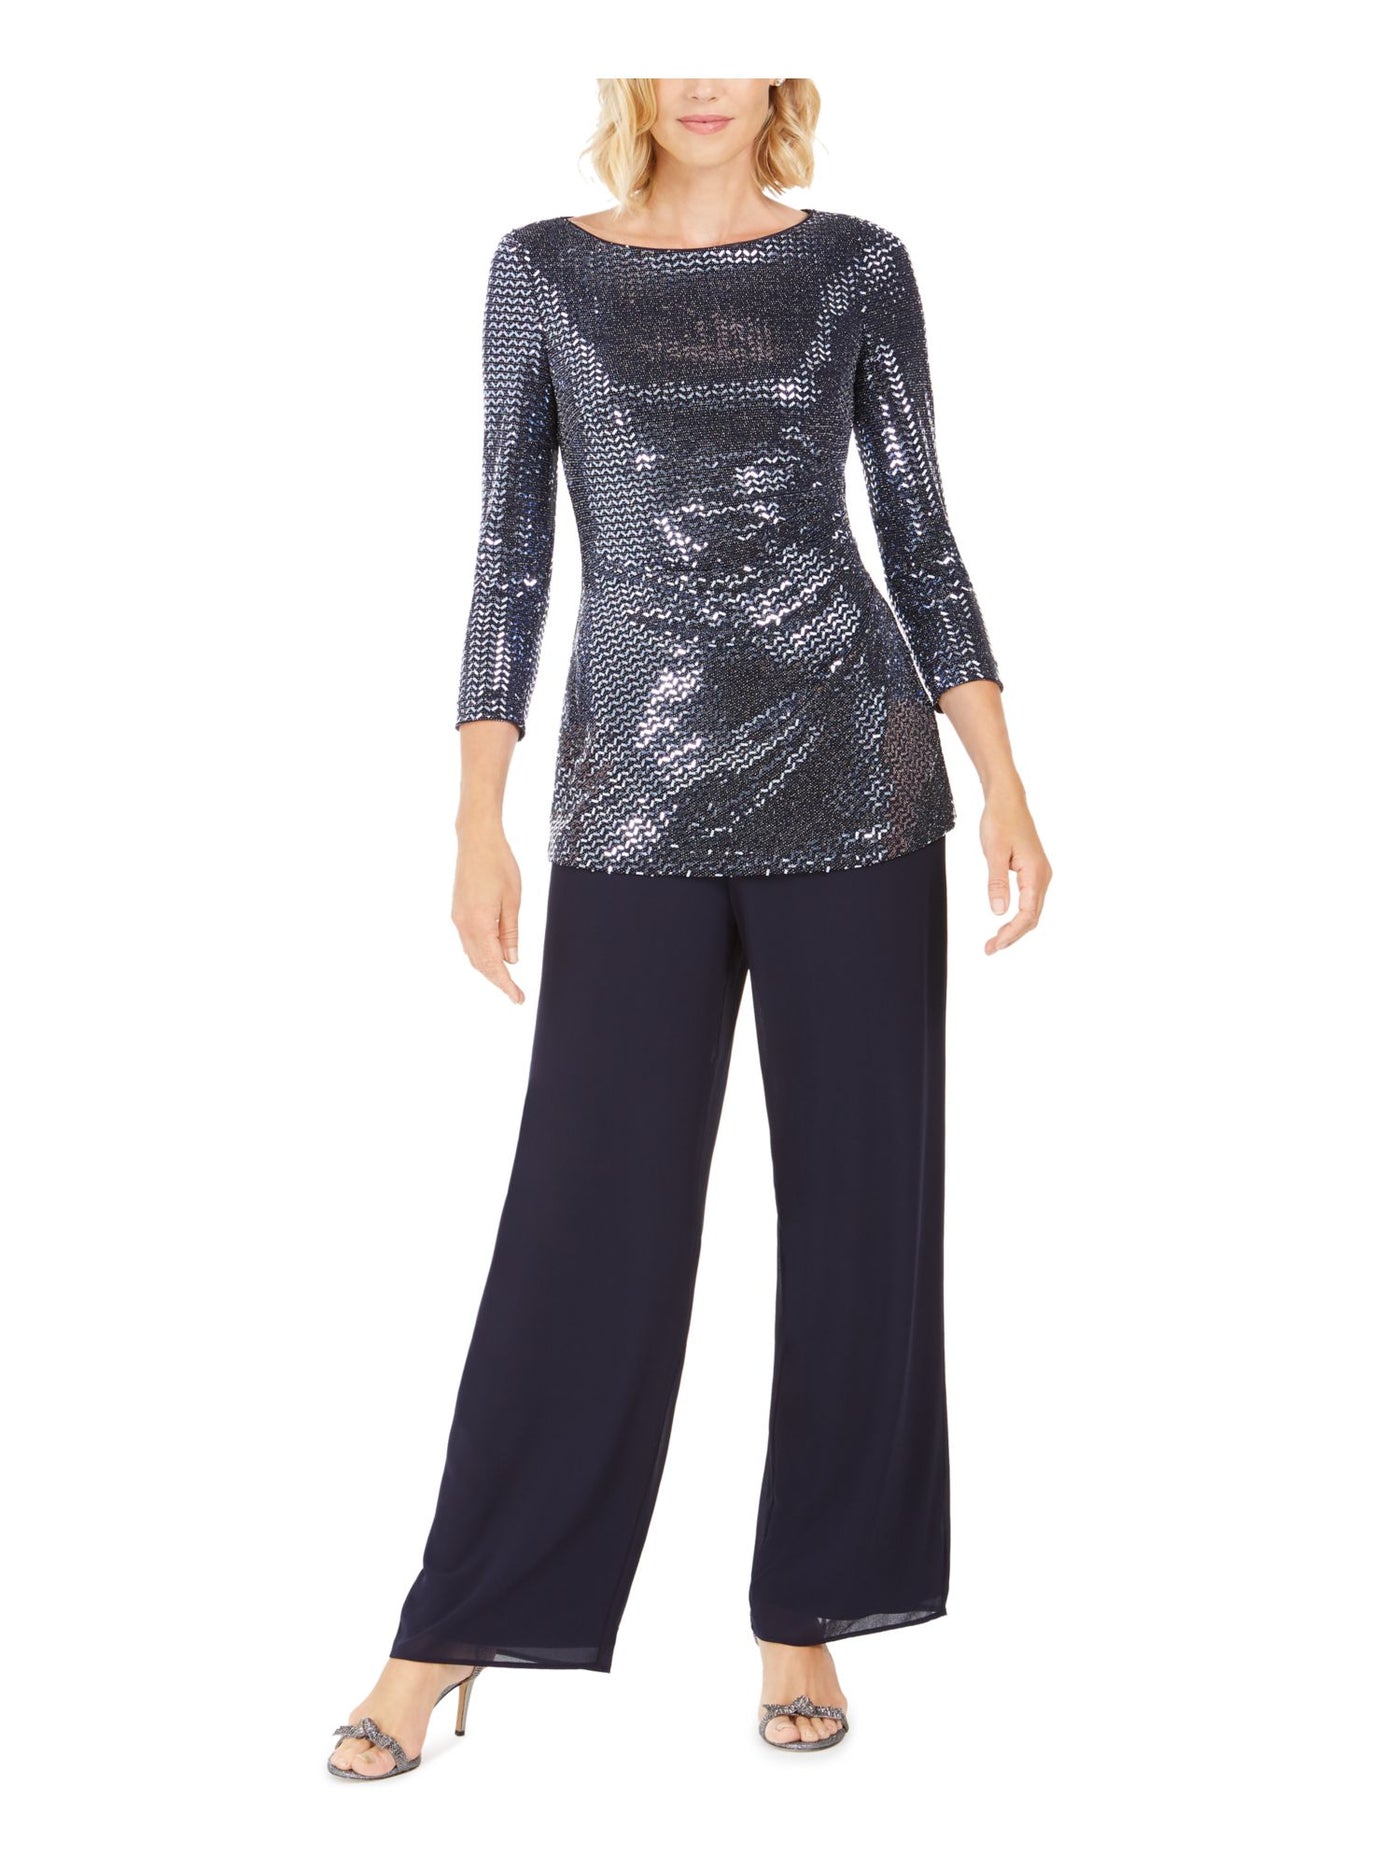 JESSICA HOWARD Womens Sequined 3/4 Sleeve Jewel Neck Party Top